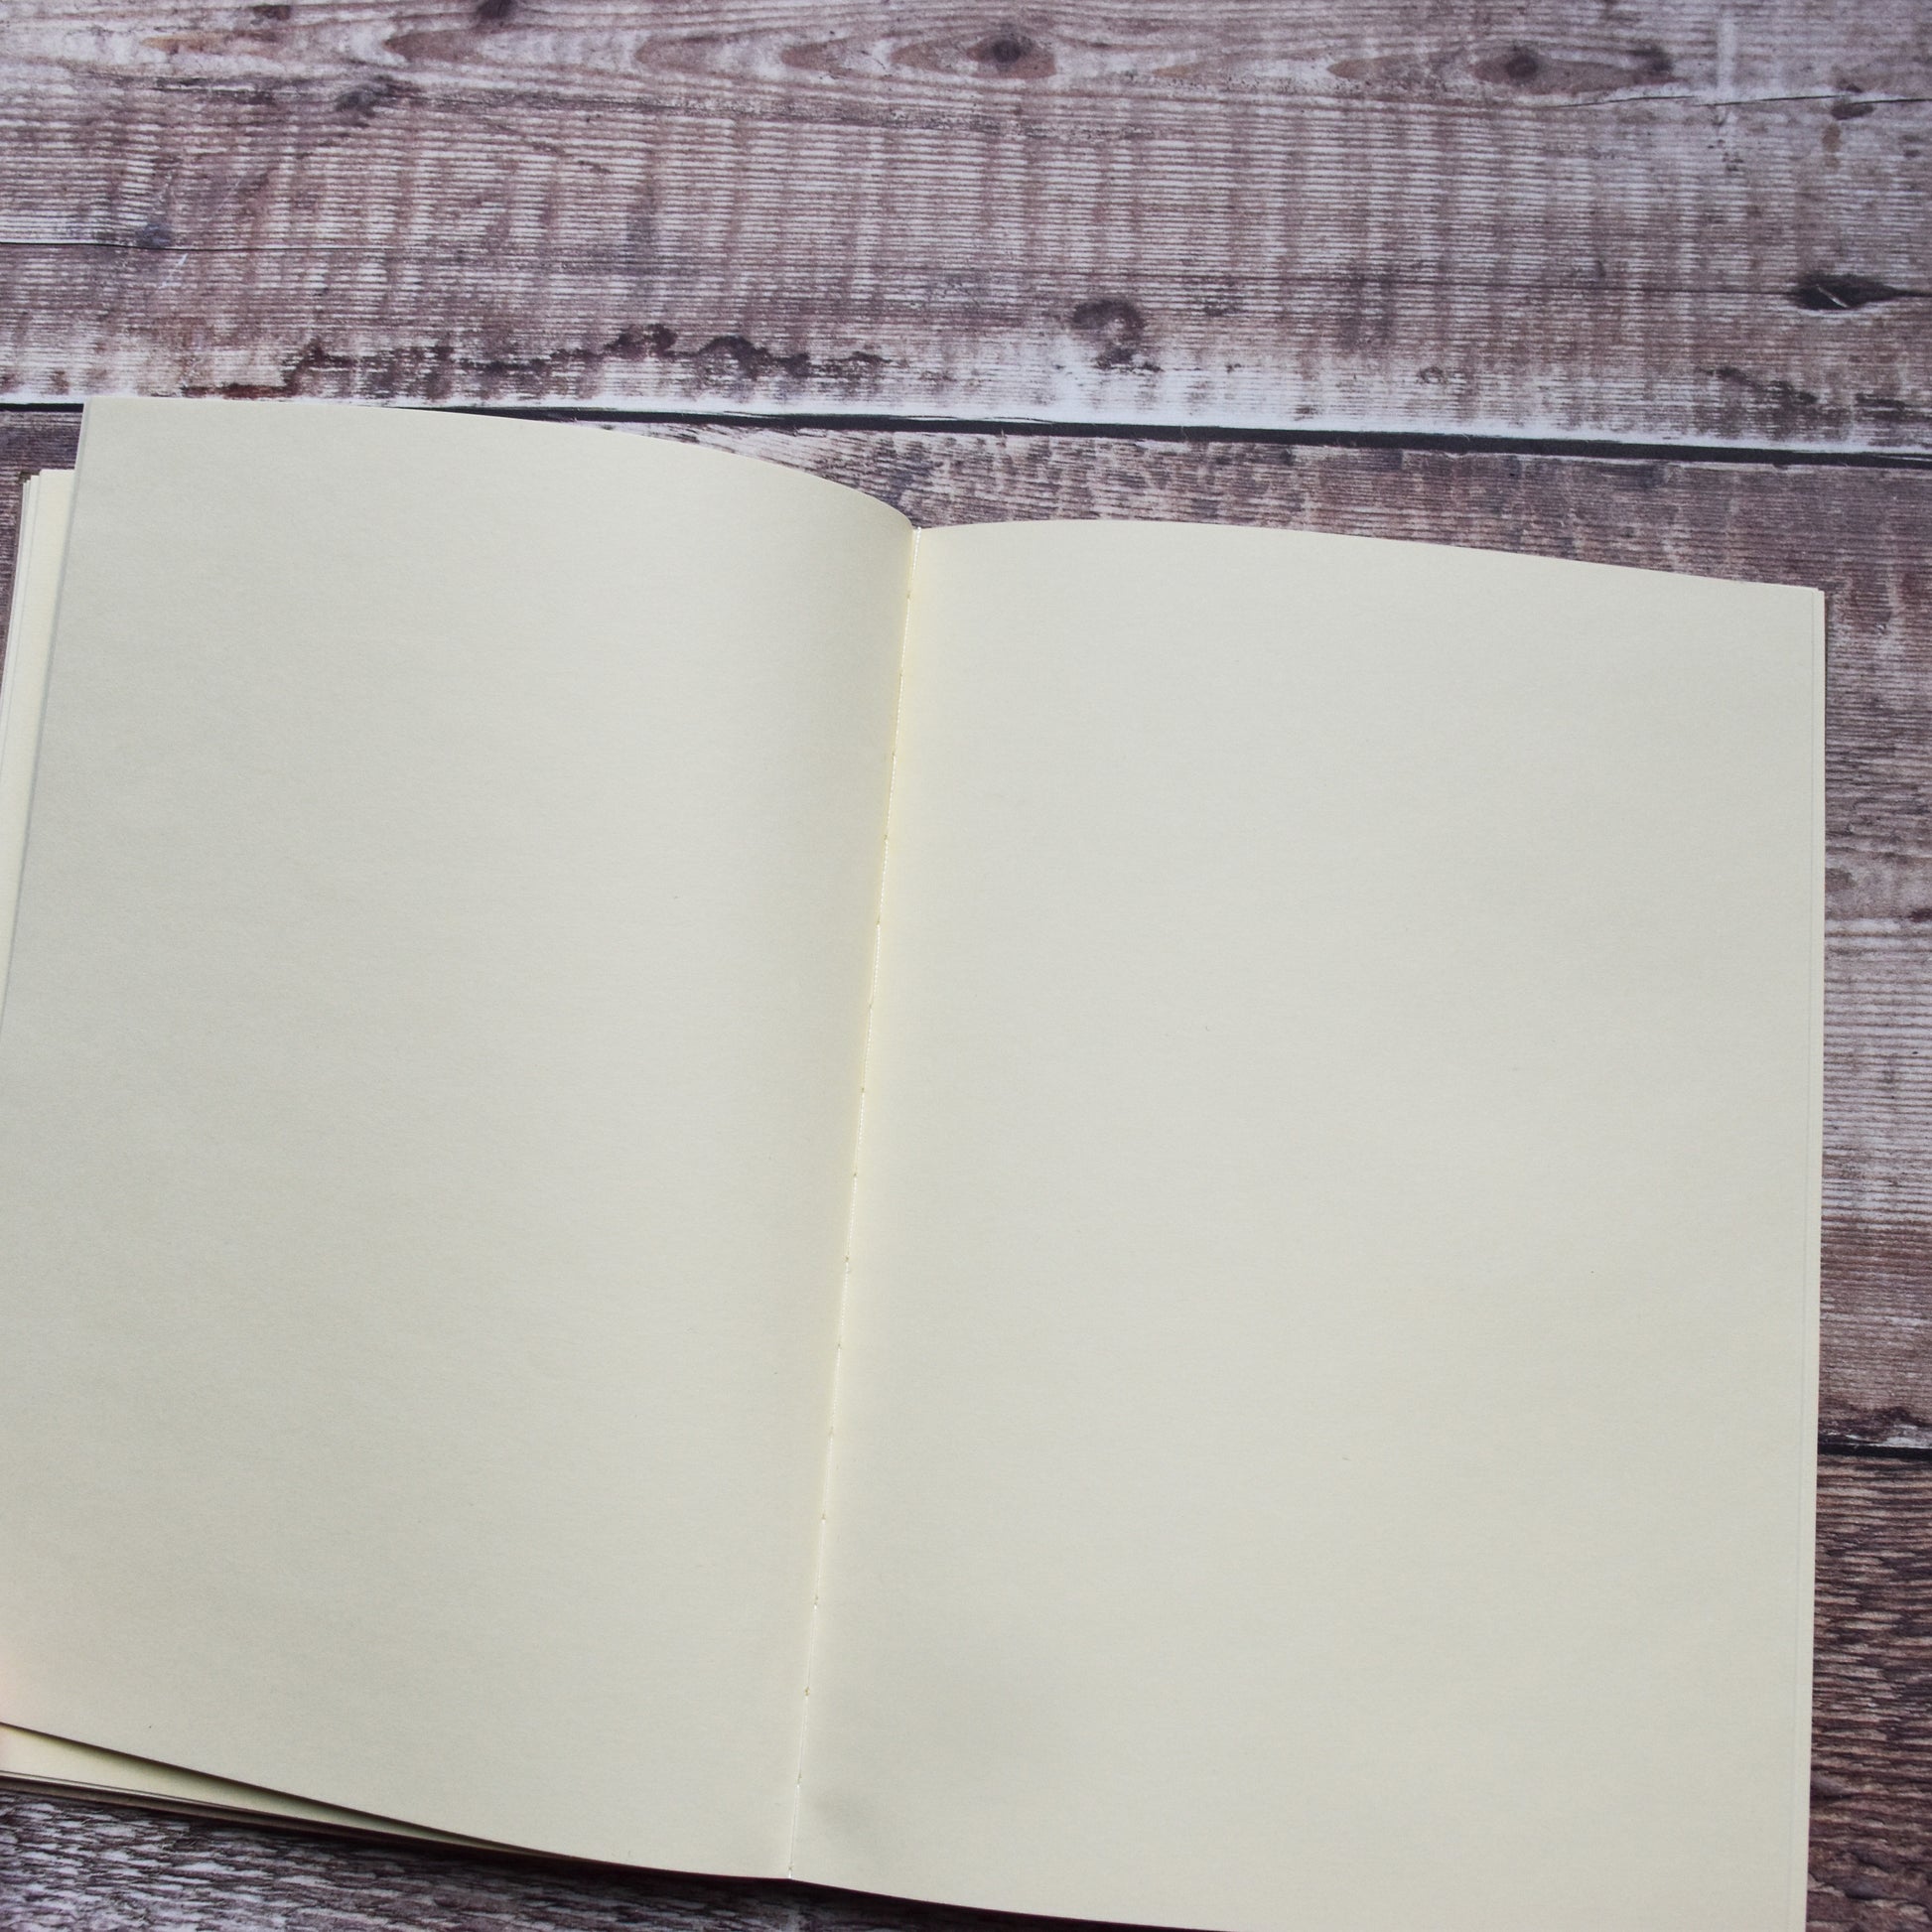 A close up of a blank open page within the A5 Heritage Collection Notebook on a brown wooden background.